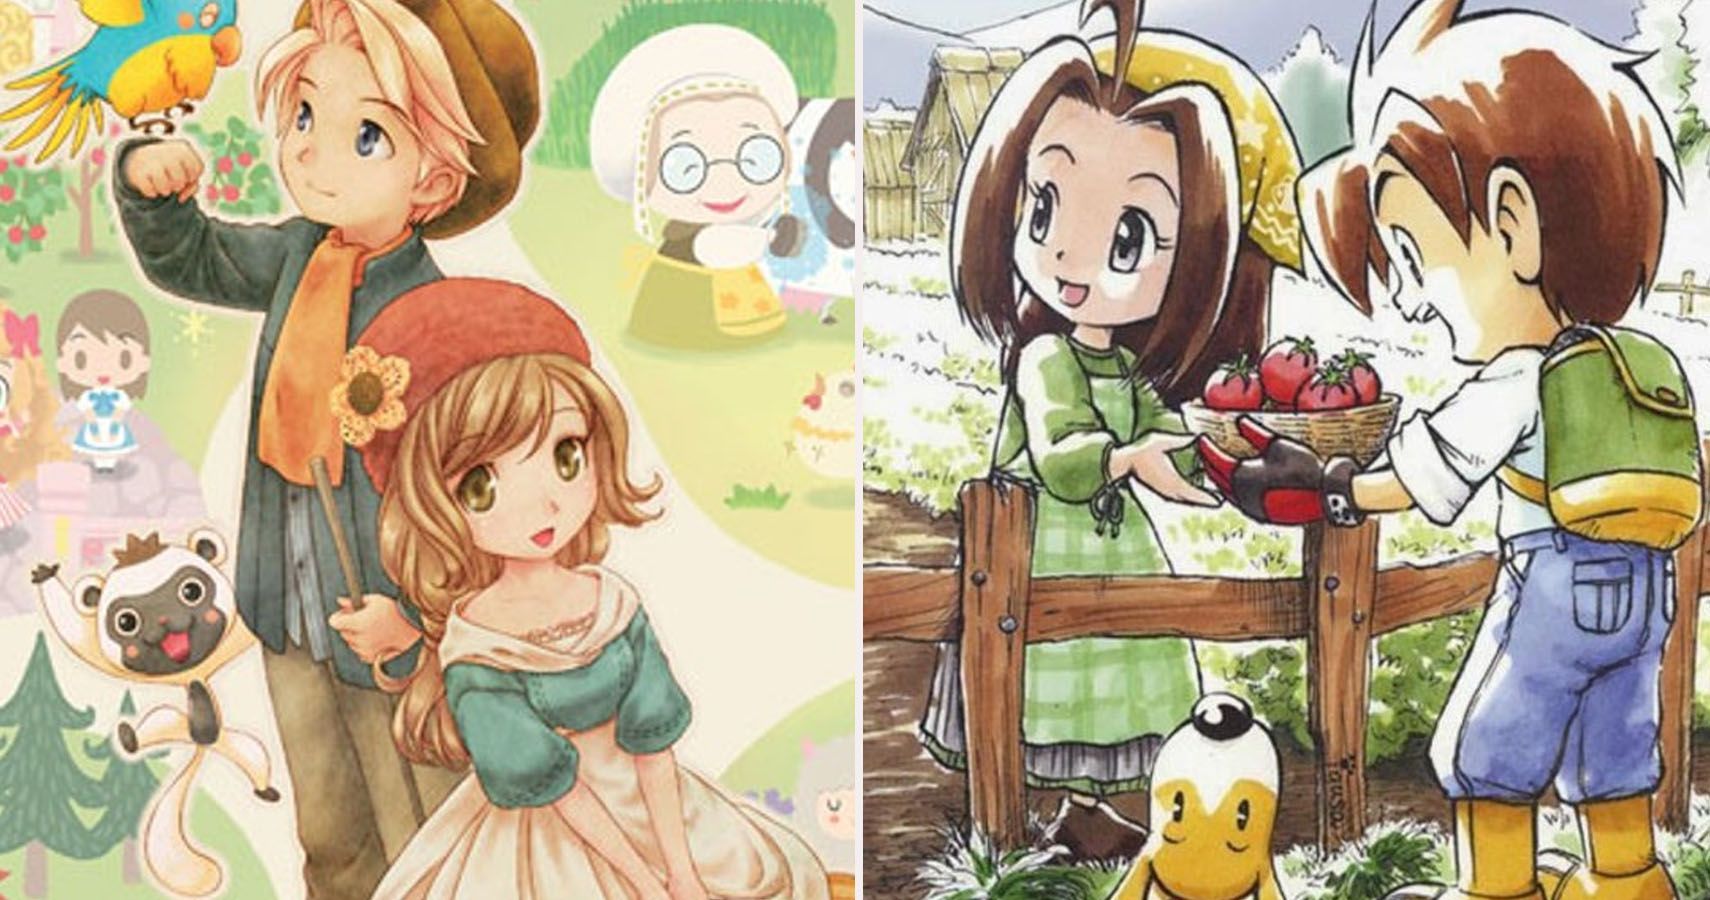 Harvest Moon Vs Story Of Seasons: What’s The Difference?